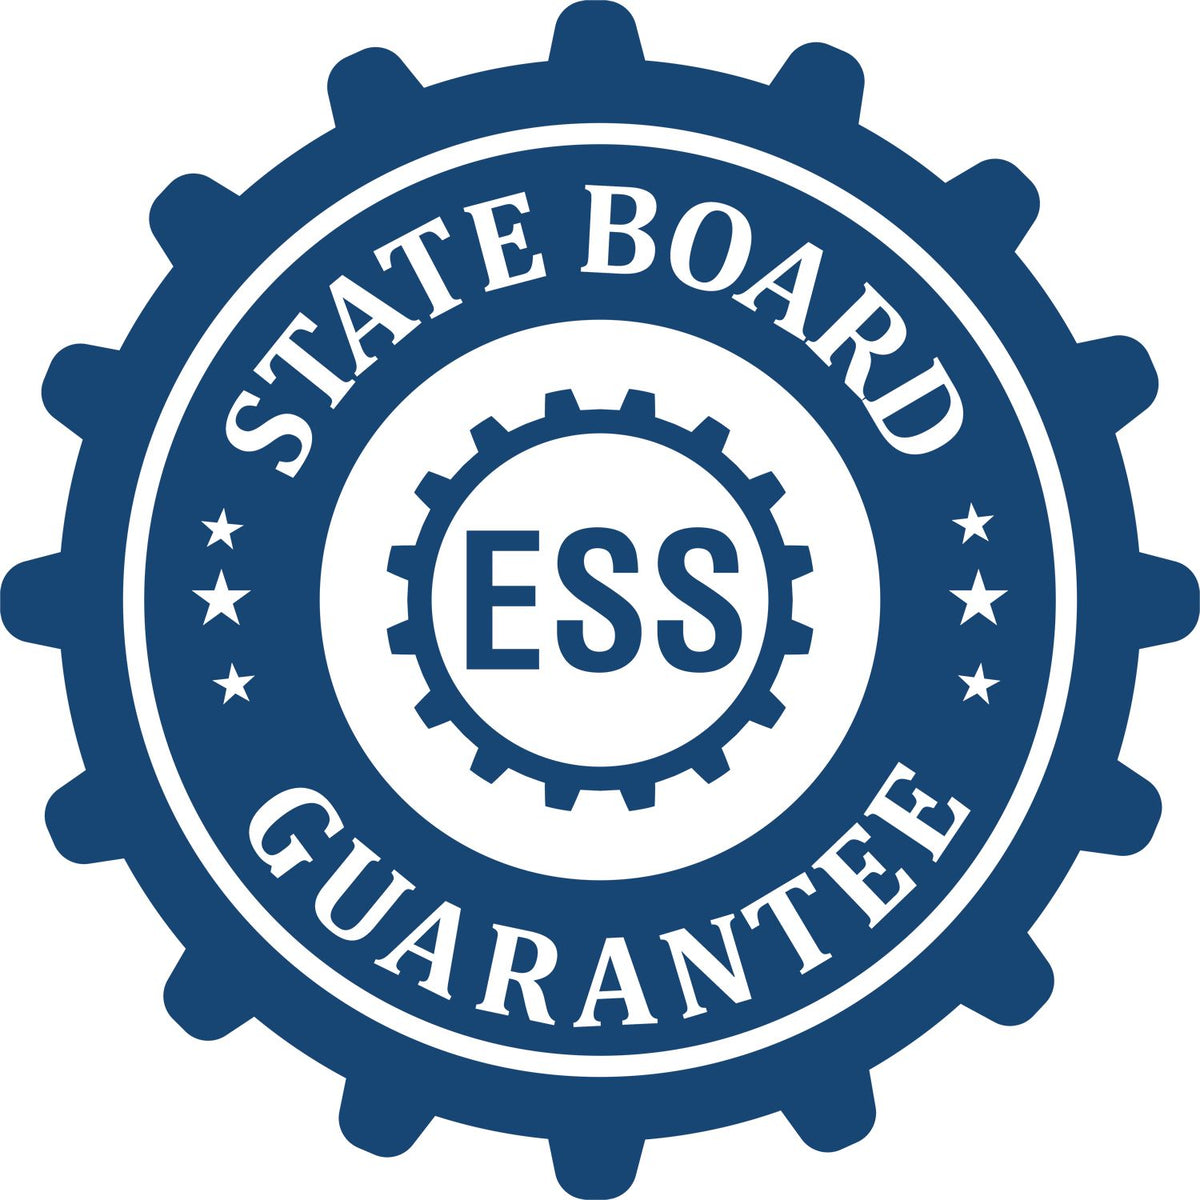 An emblem in a gear shape illustrating a state board guarantee for the Hybrid Michigan Land Surveyor Seal